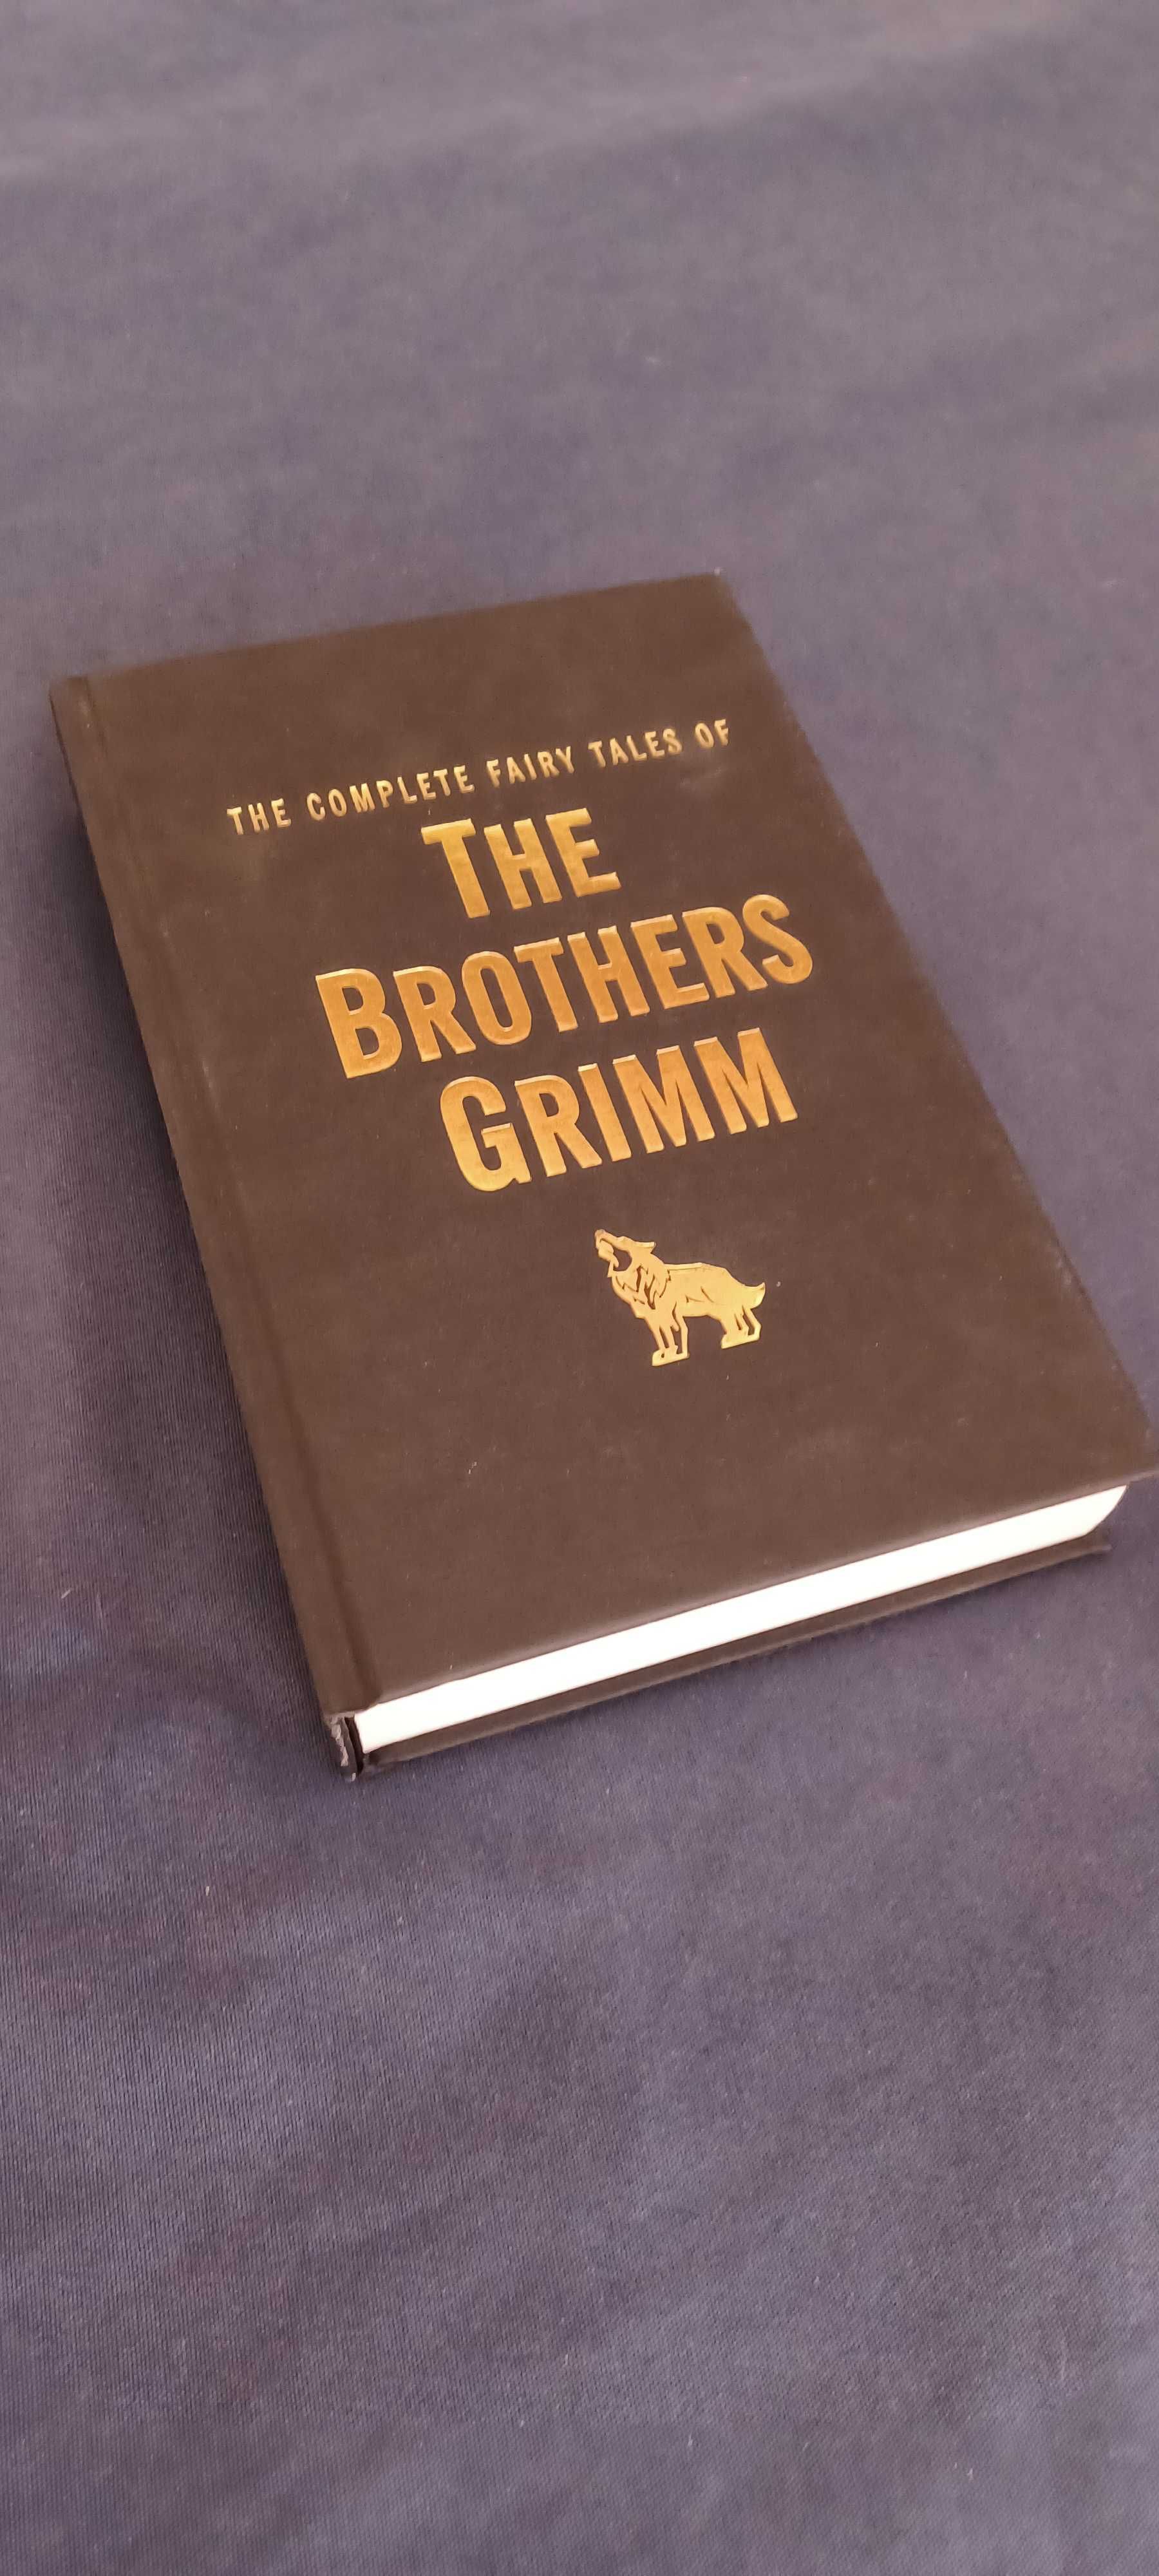 The Complete Fairy Tales of the Brothers Grimm.